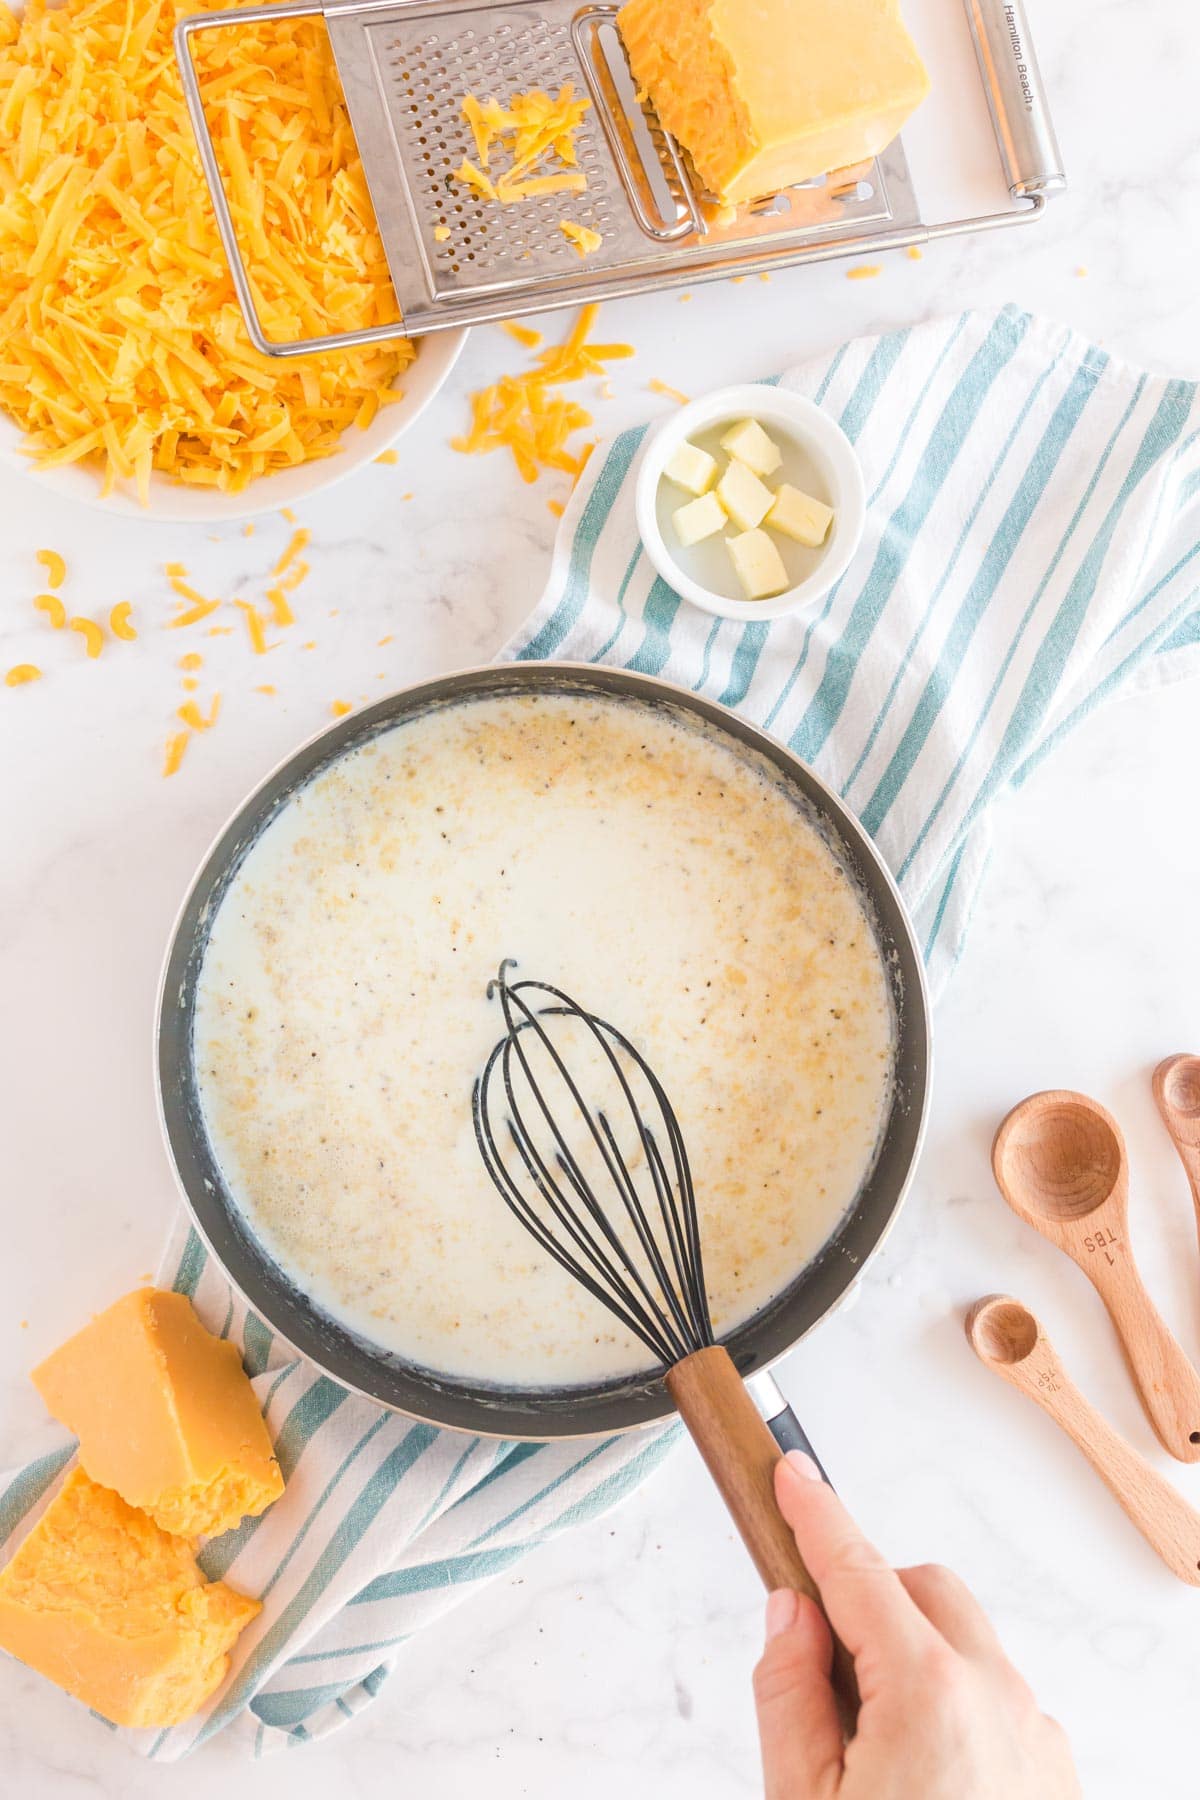 Woman's hand holding a whisk over a pan with milk and butter